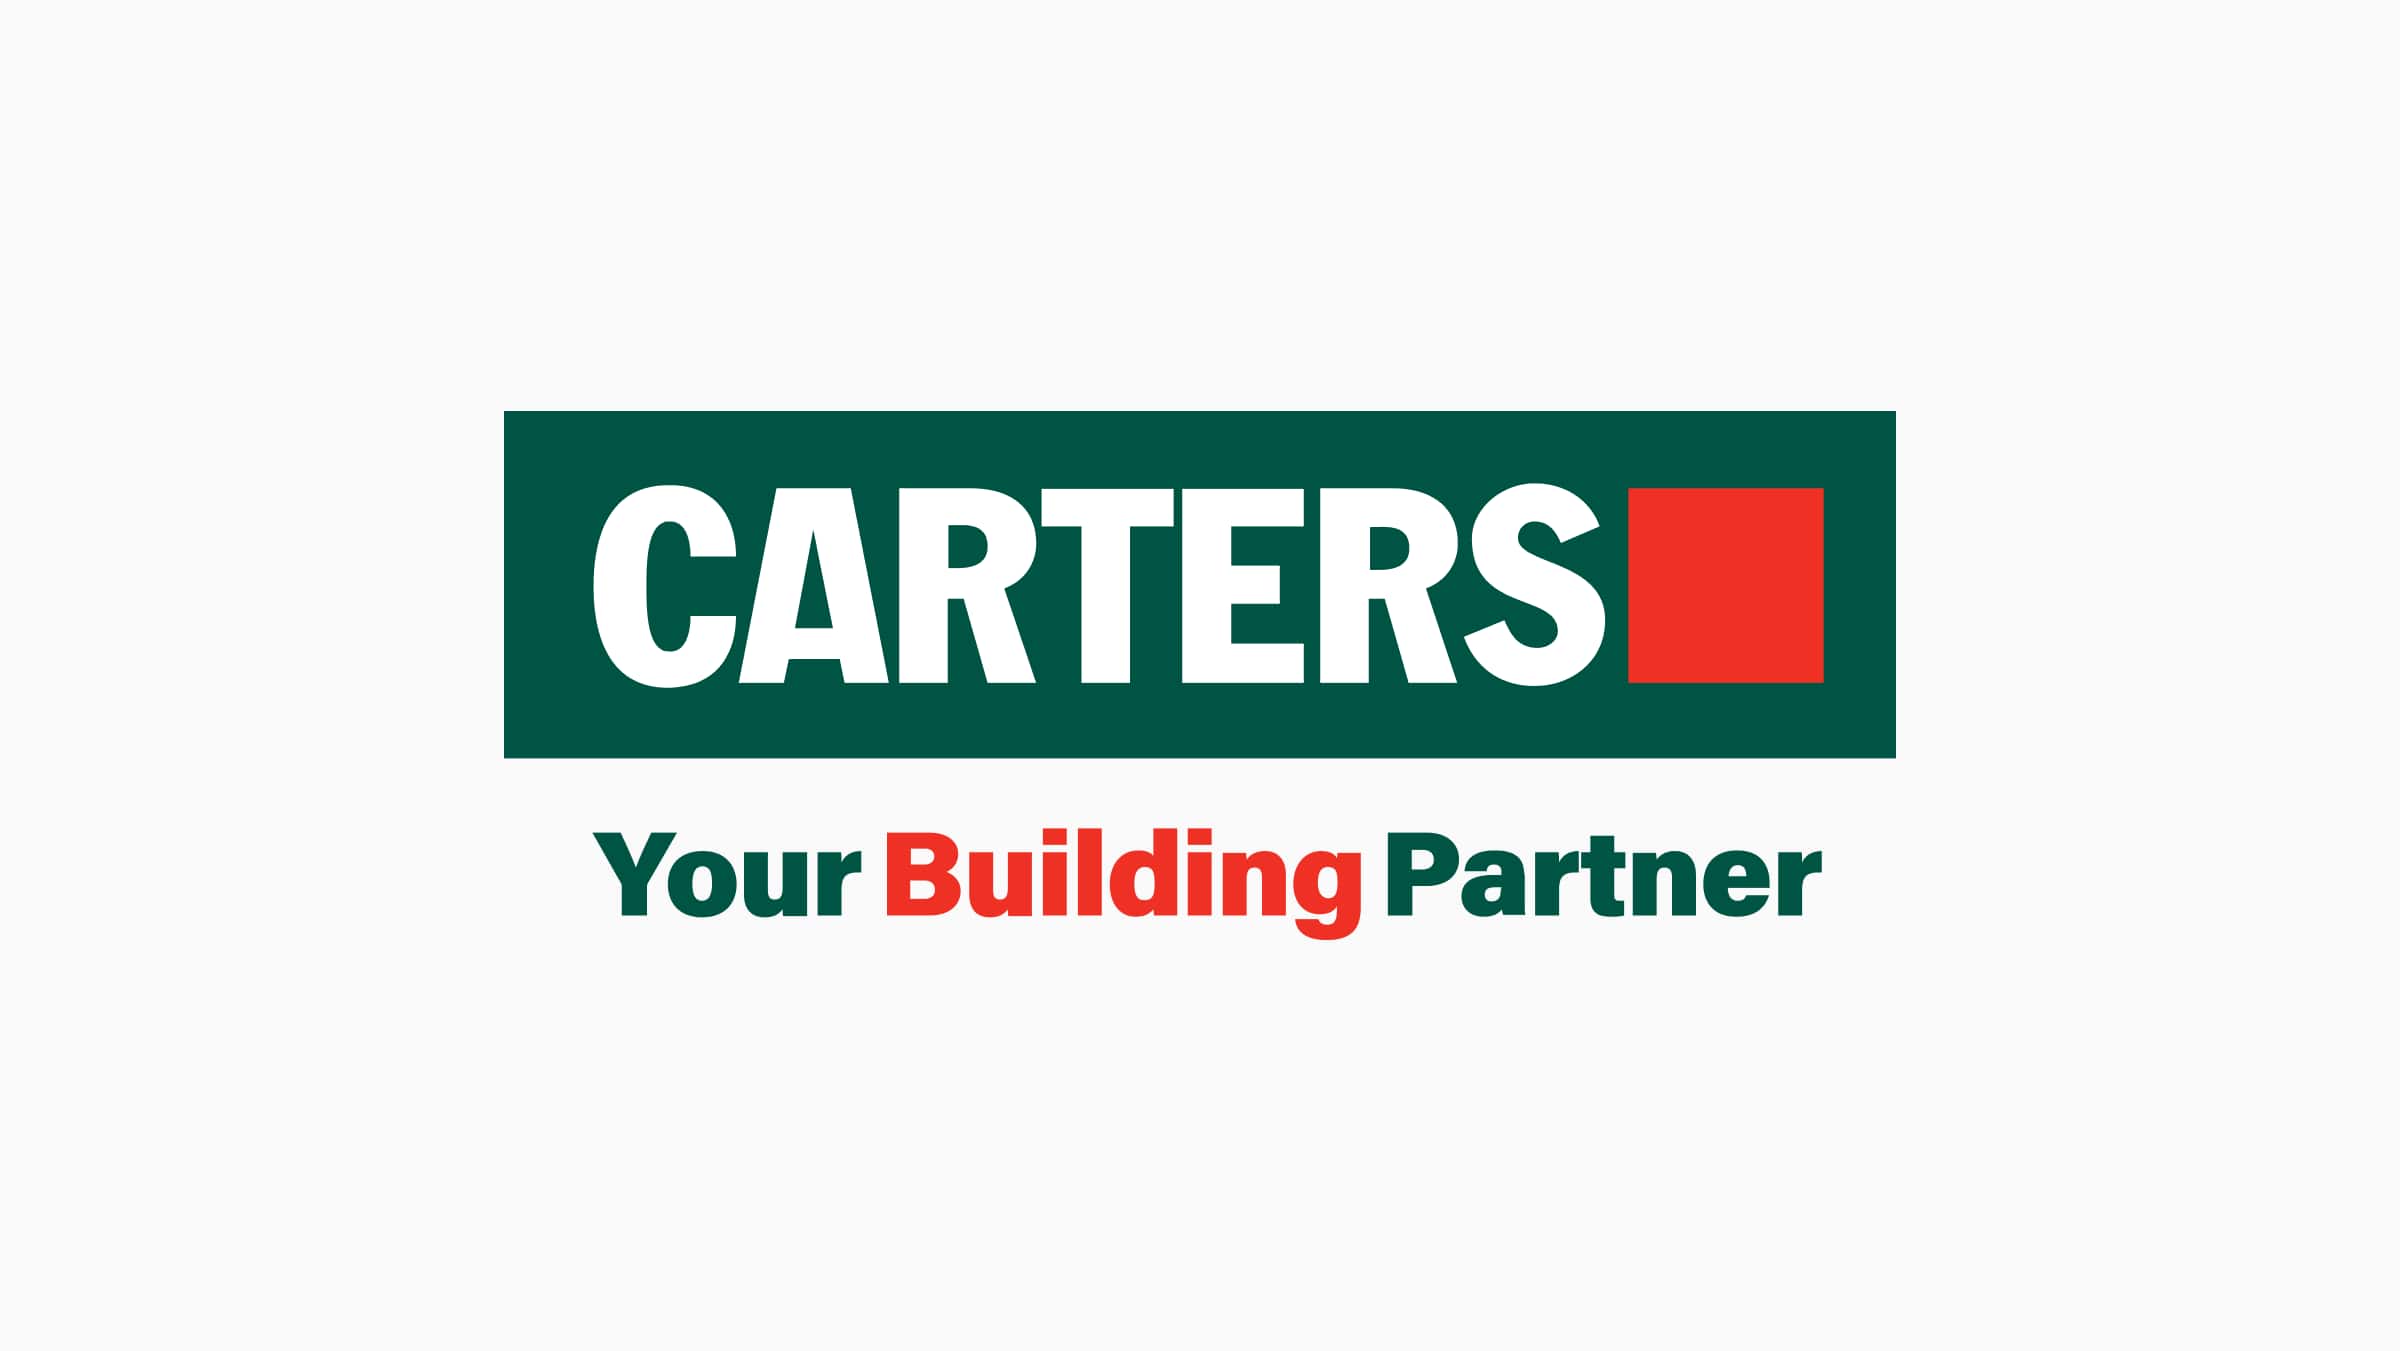 The Carters logo